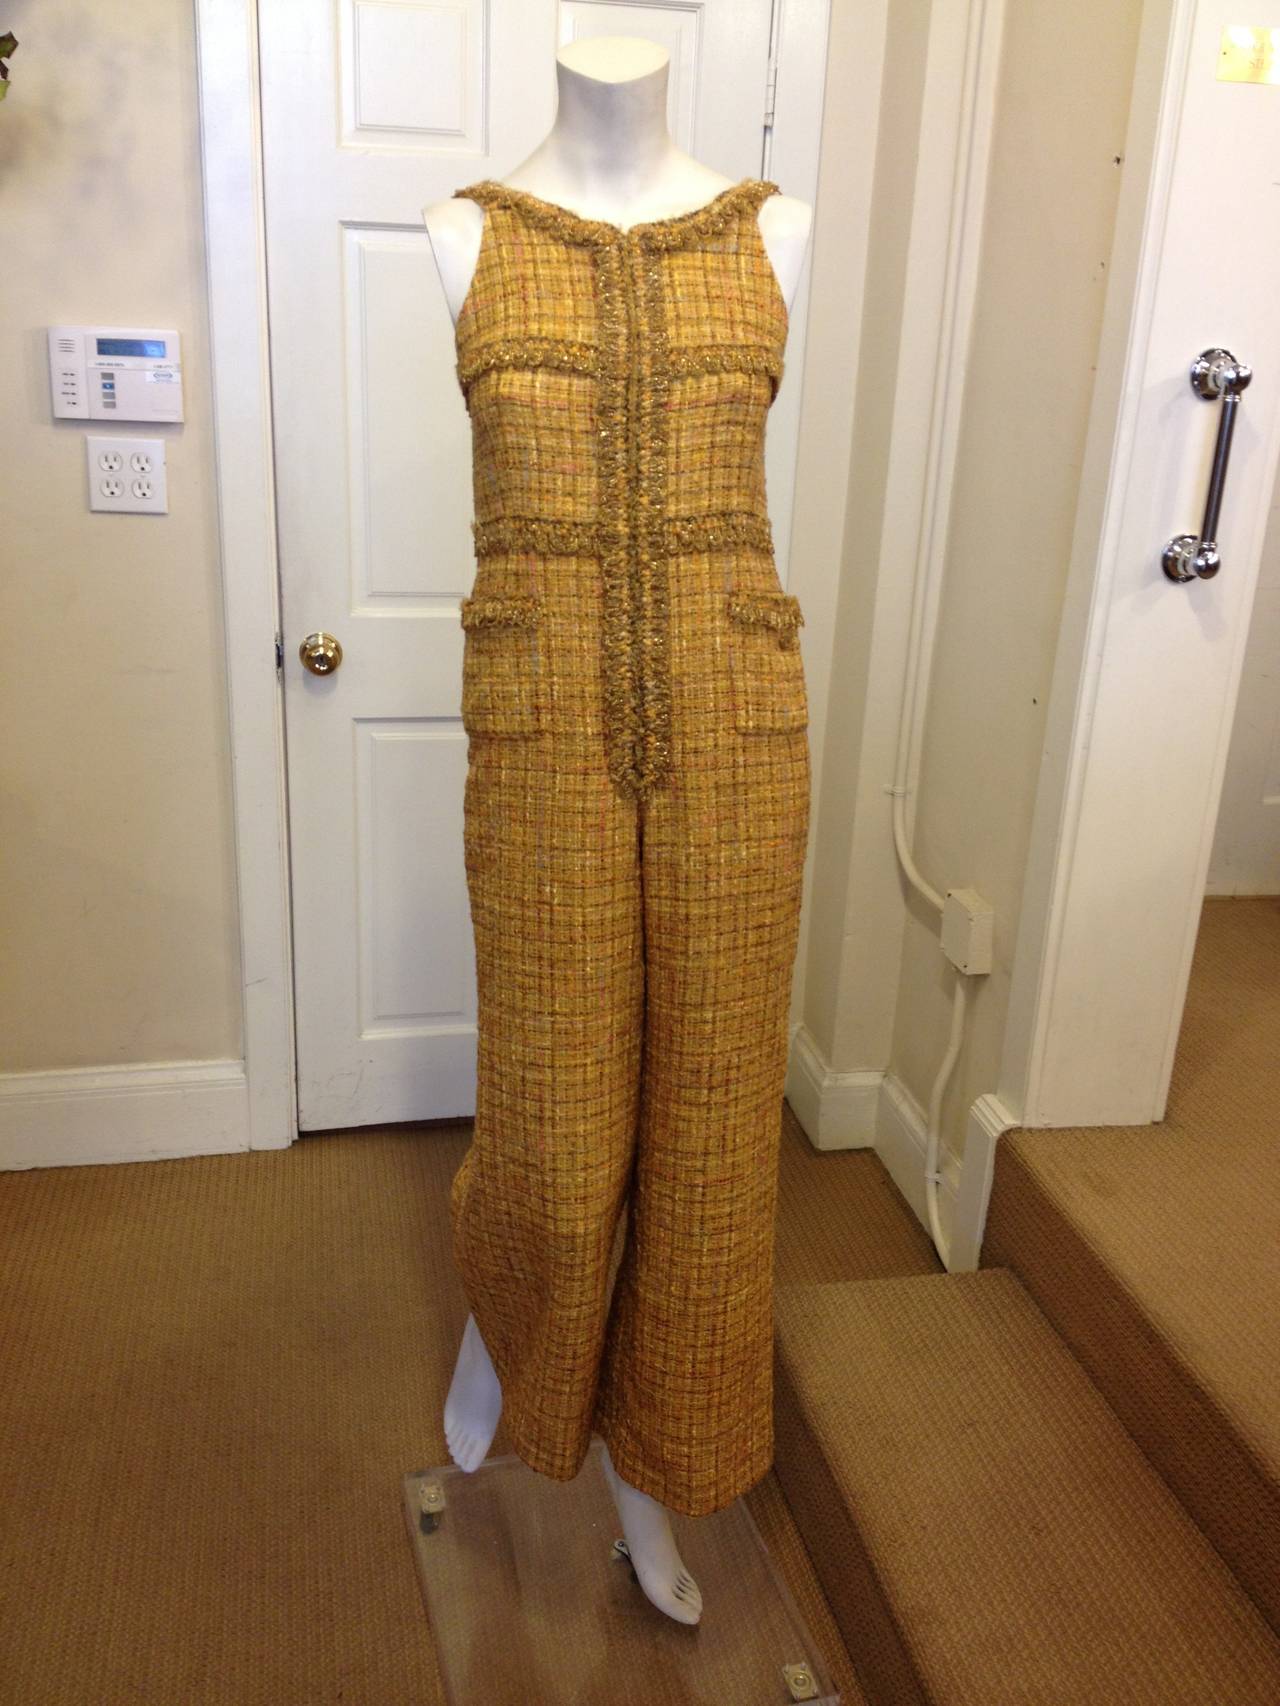 This Chanel ensemble suit is positively amazing! The warm, earth-toned mustard yellow is perfect for any season but feels especially right in autumn, while the tweed is timelessly and unmistakably Chanel. The ensemble consists of both a jacket and a